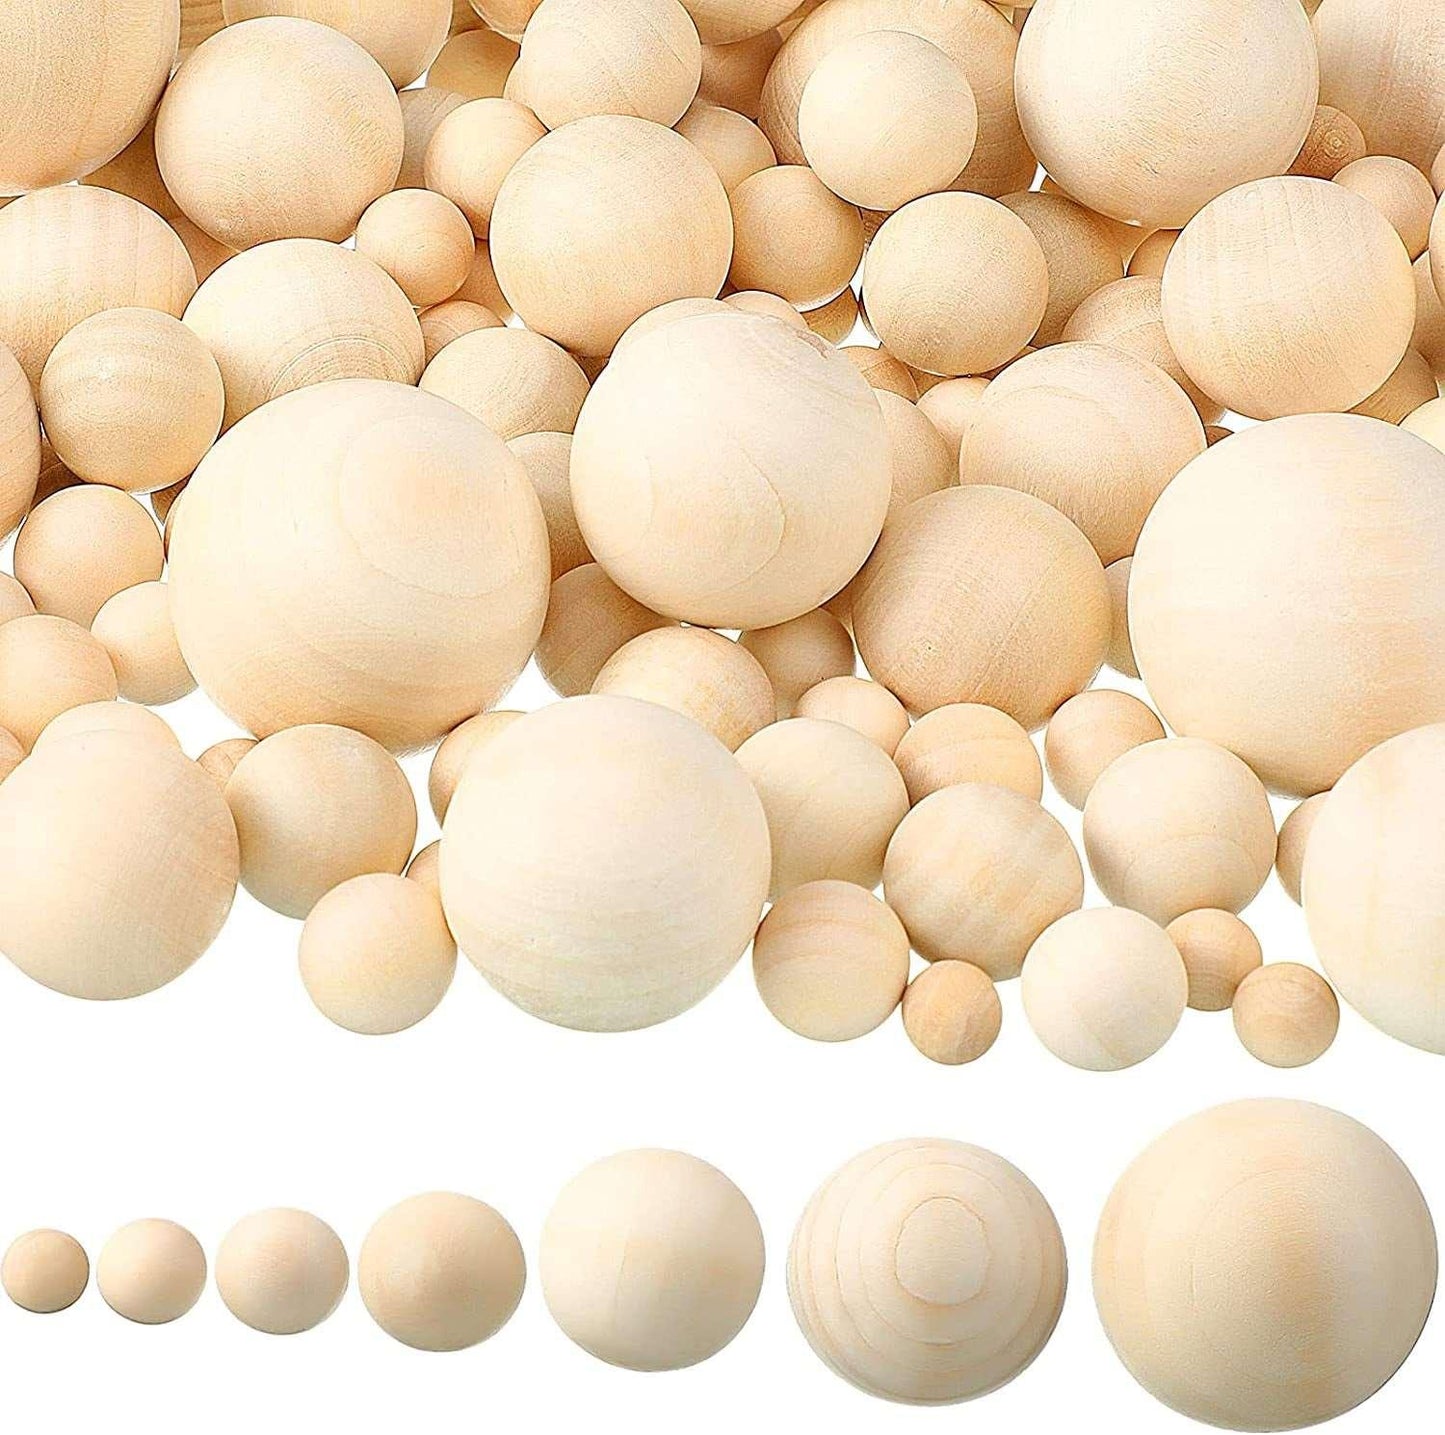 250 Pieces Wooden Balls Unfinished round Wood Balls Craft Small Assorted Spheres in 7 Sizes DIY Craft Projects Jewelry - WoodArtSupply